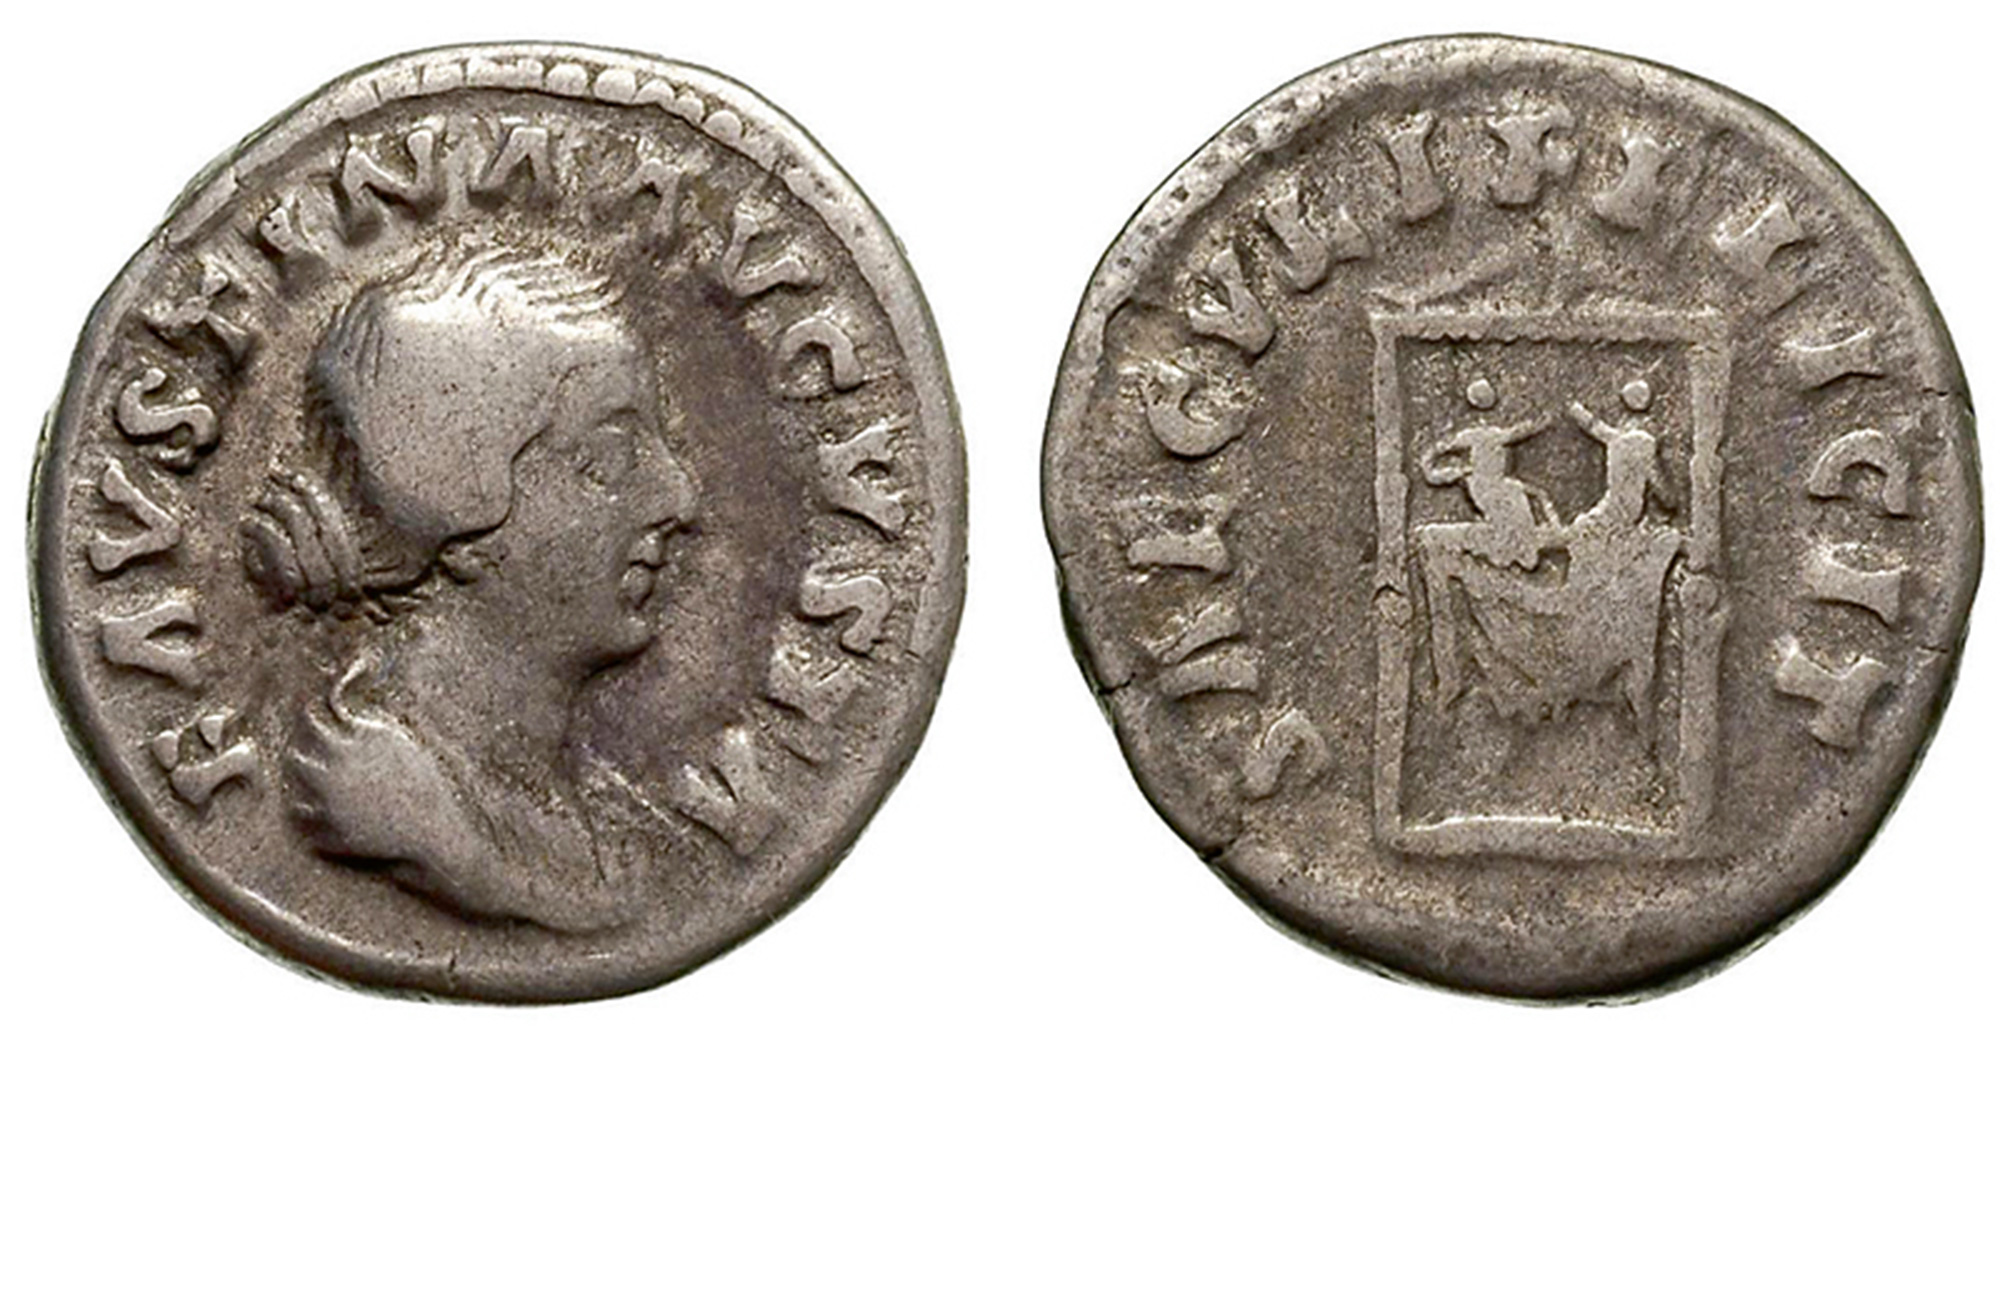 Photographs of the front and back of a Roman coin, circa one hundred sixty-one one hundred seventy, which commemorates the birth of Faustina the Younger’s twin sons Commodus and Fulvus Antoninus.